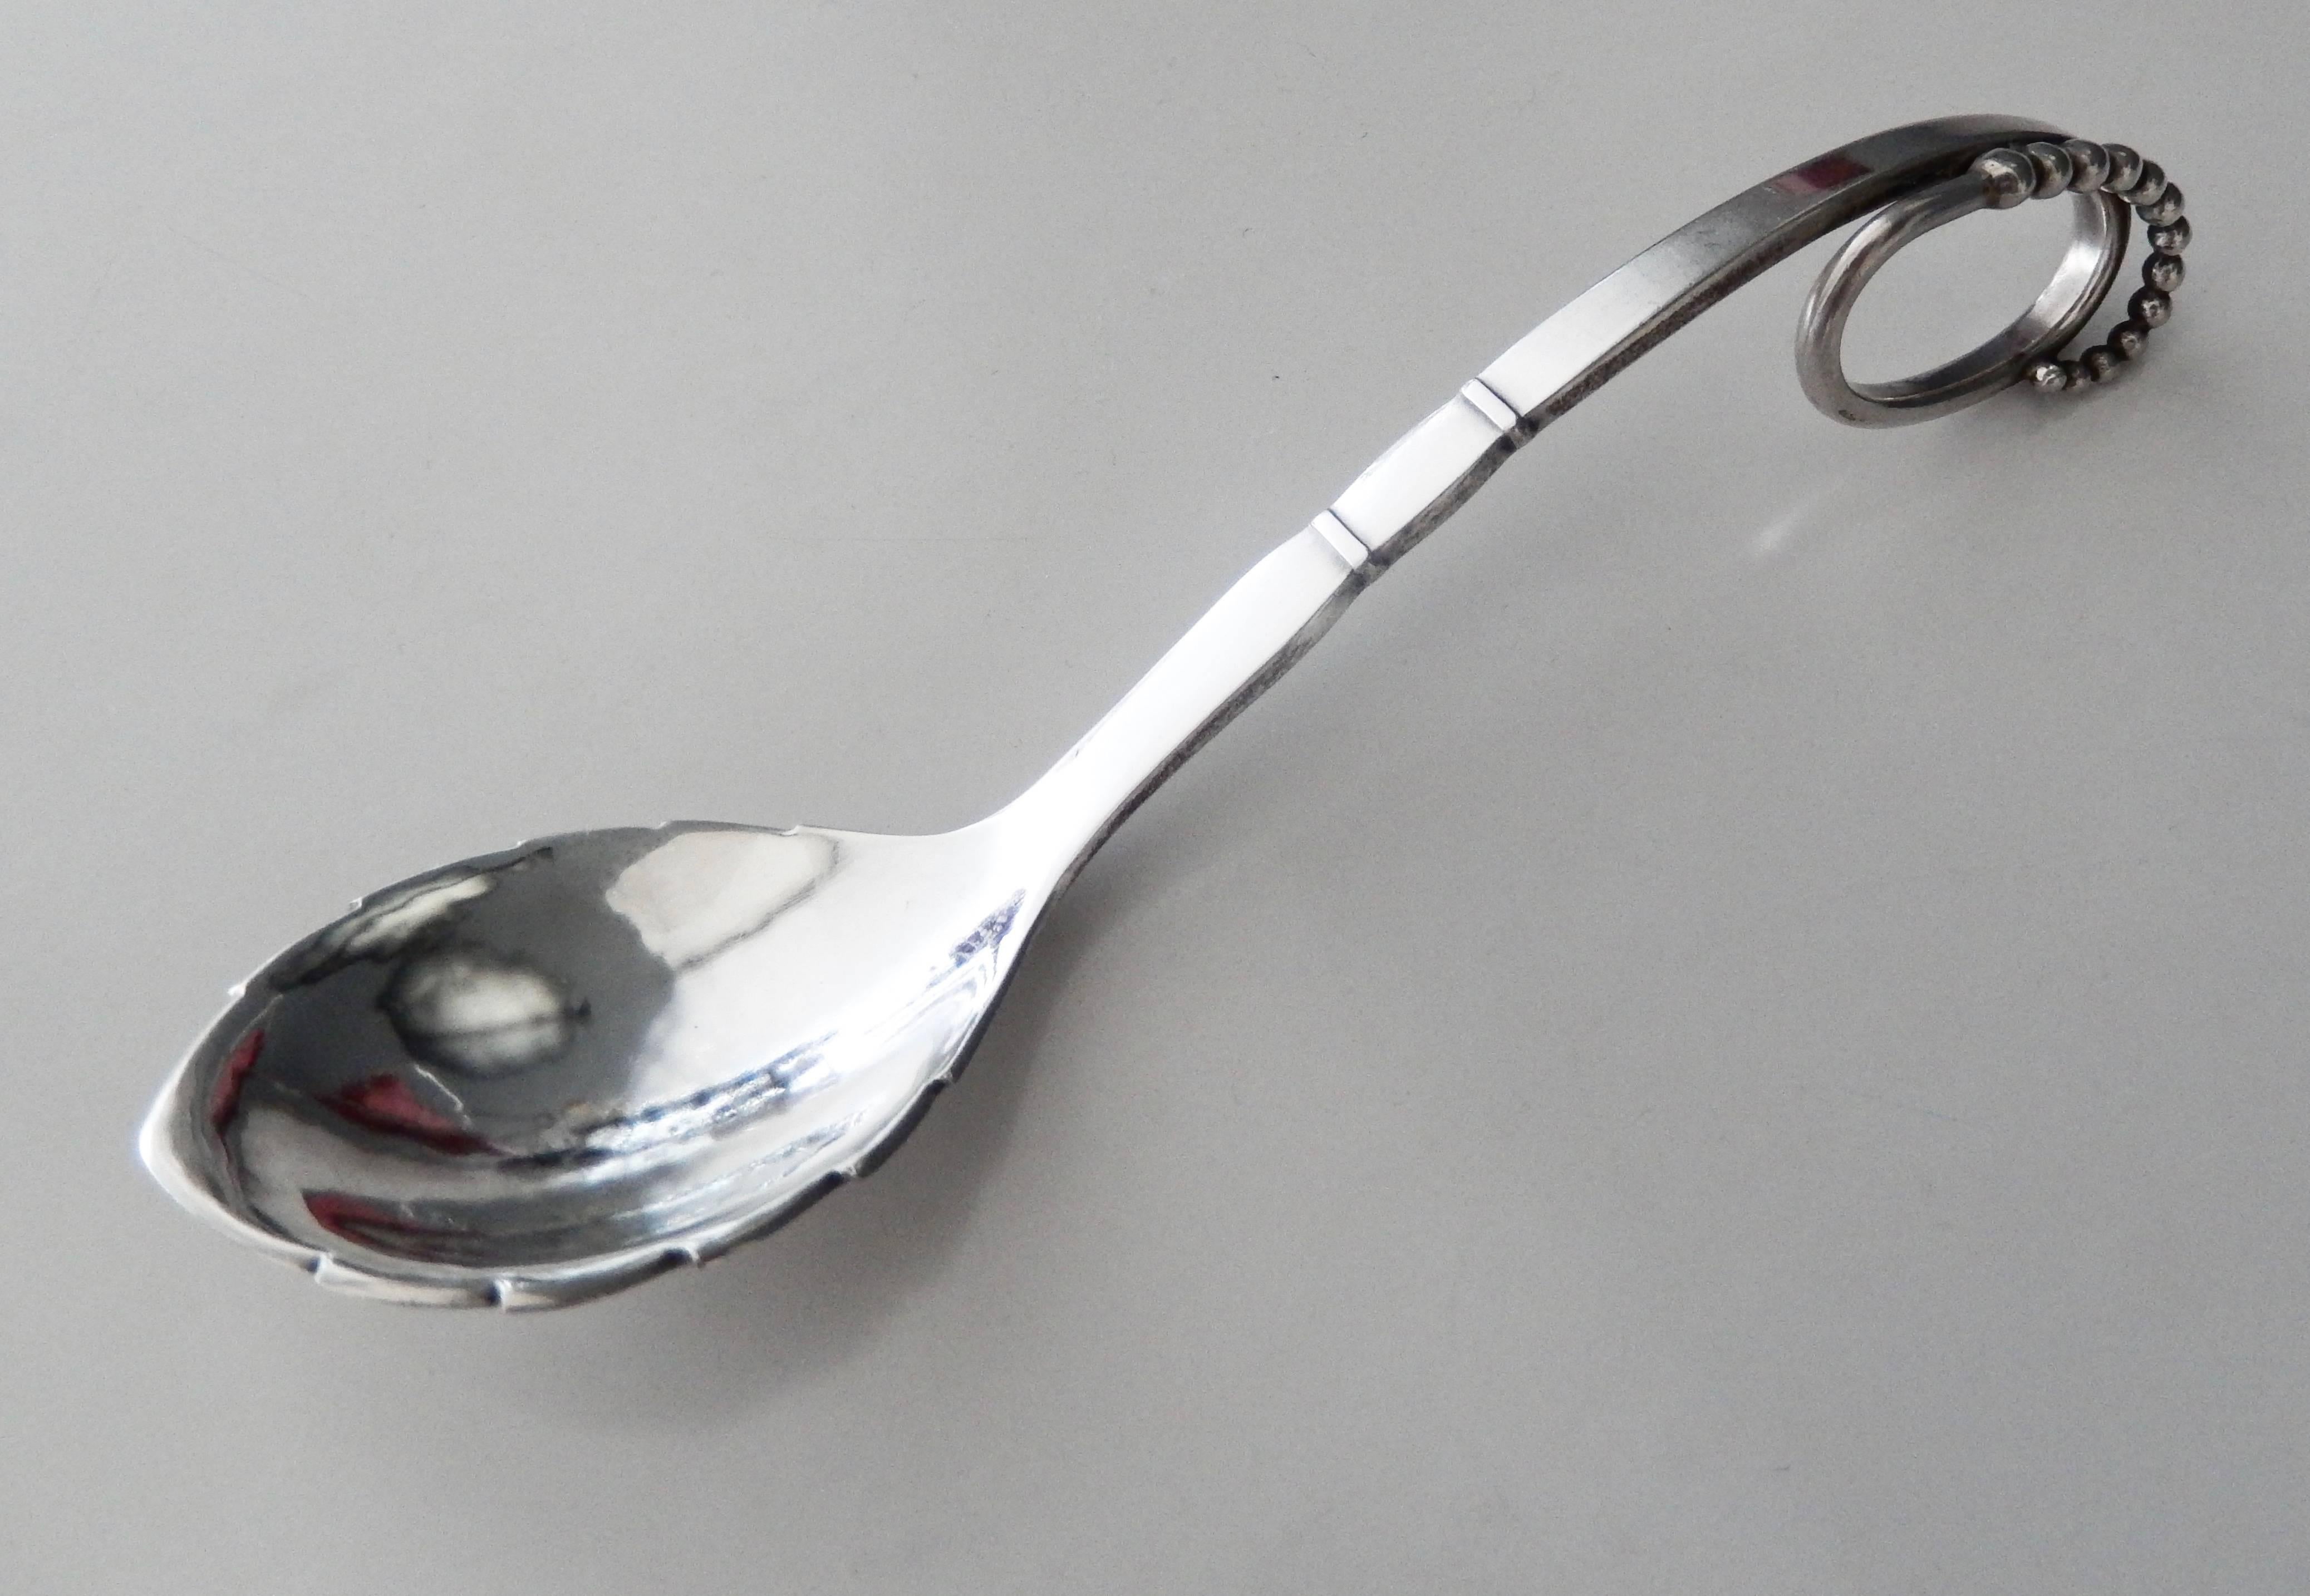 A vintage, hand-wrought, sterling silver jam spoon designed by Georg Jensen from the beginning of the 20th century. Jensen pieces from this early period of production are scarce. A beautiful, organic form by a master silversmith, in excellent